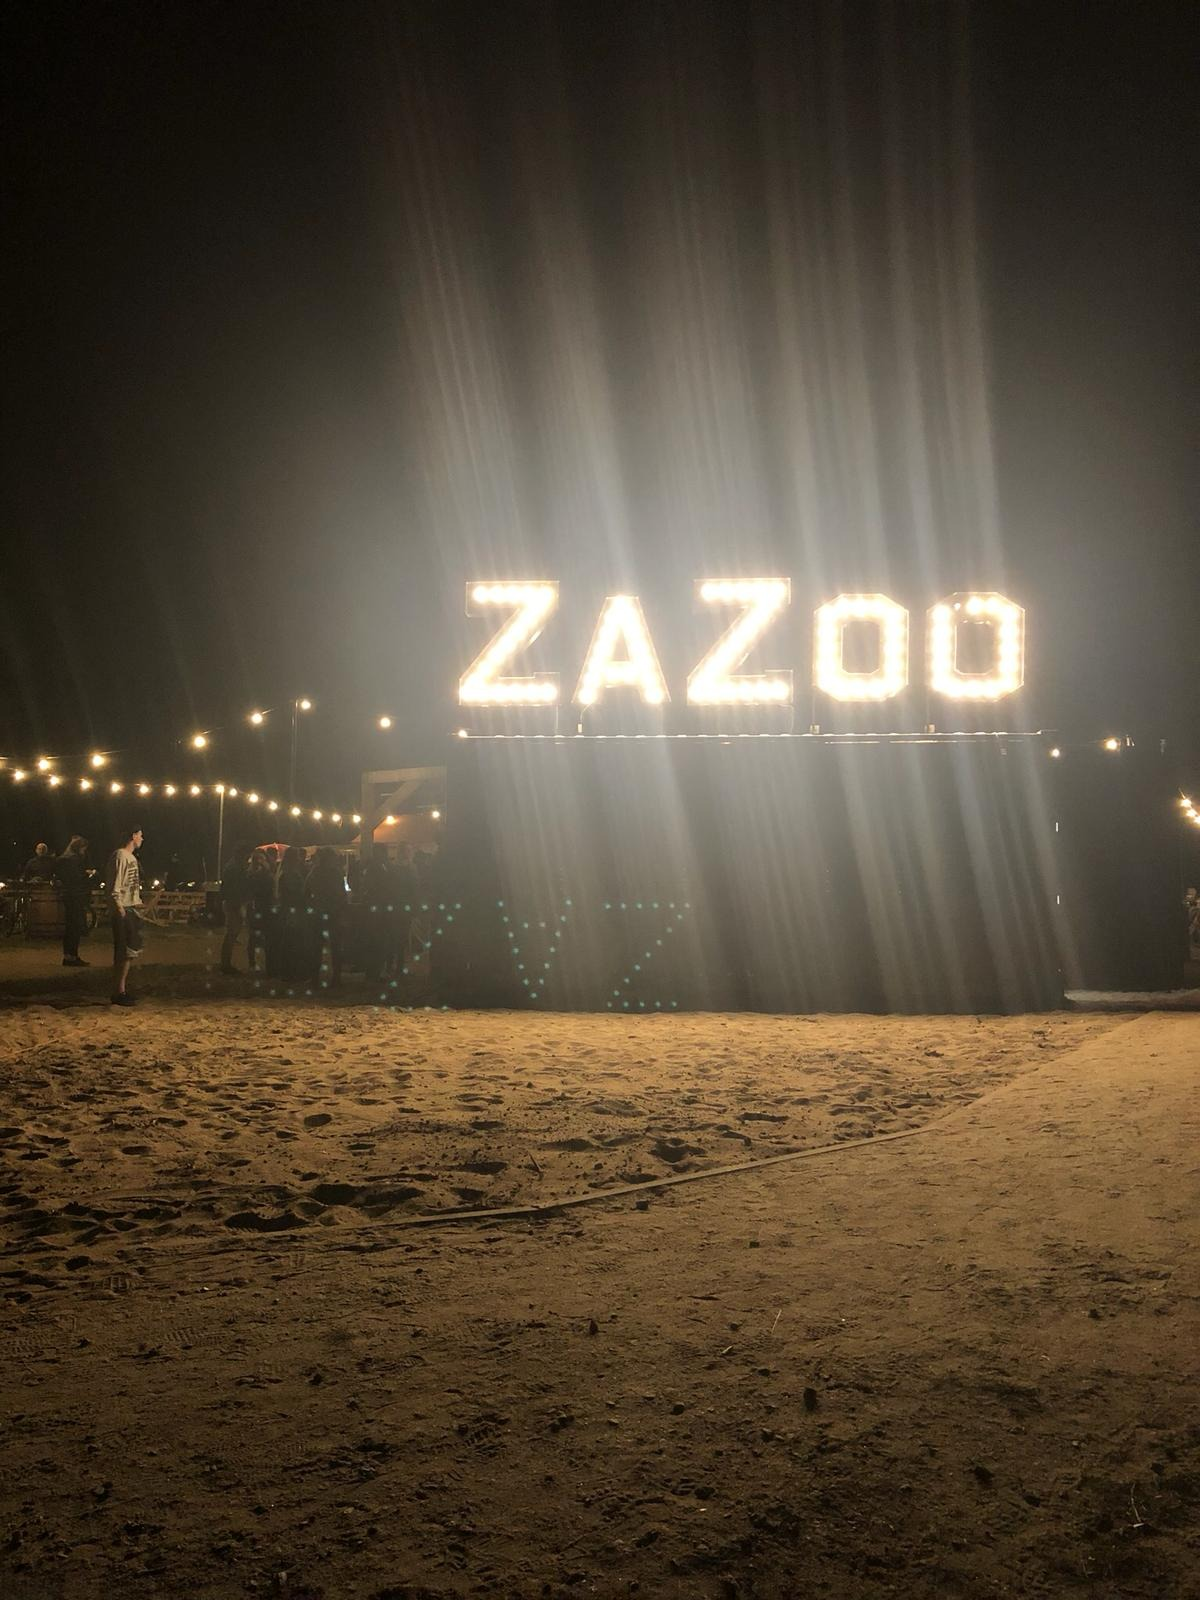 Some pictures of ZaZoo beach bar